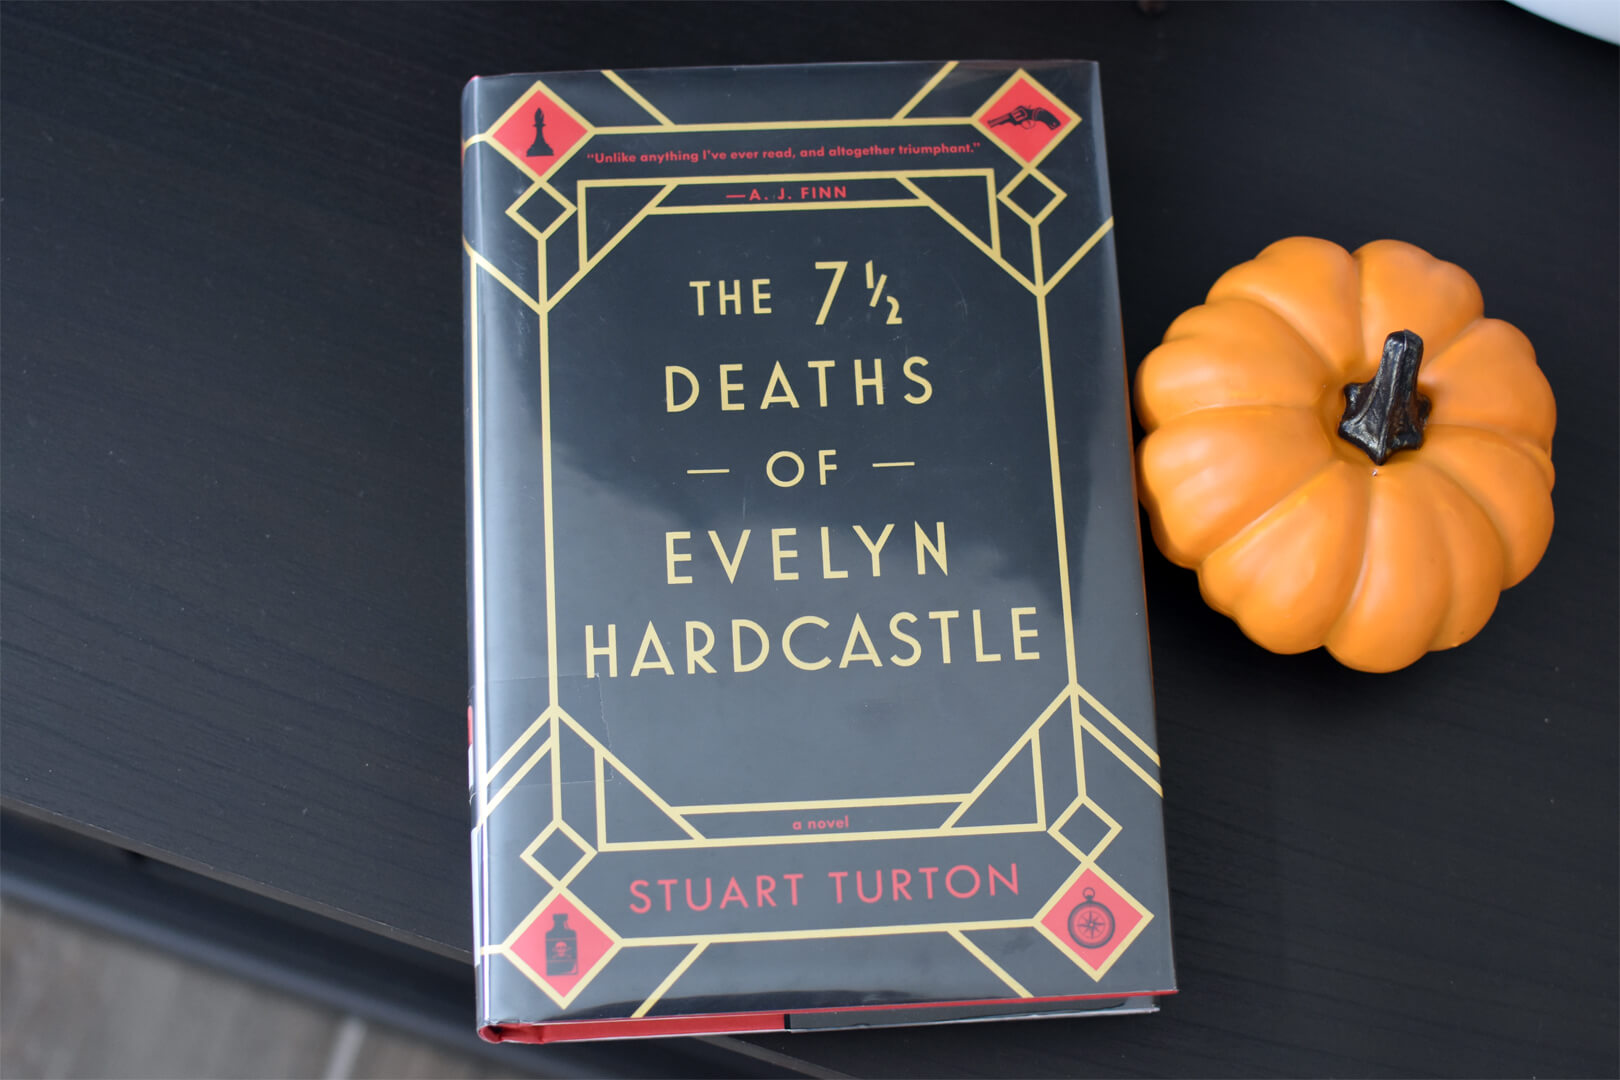 Book Club Questions for The 7 ½ Deaths of Evelyn Hardcastle by Stuart Turton